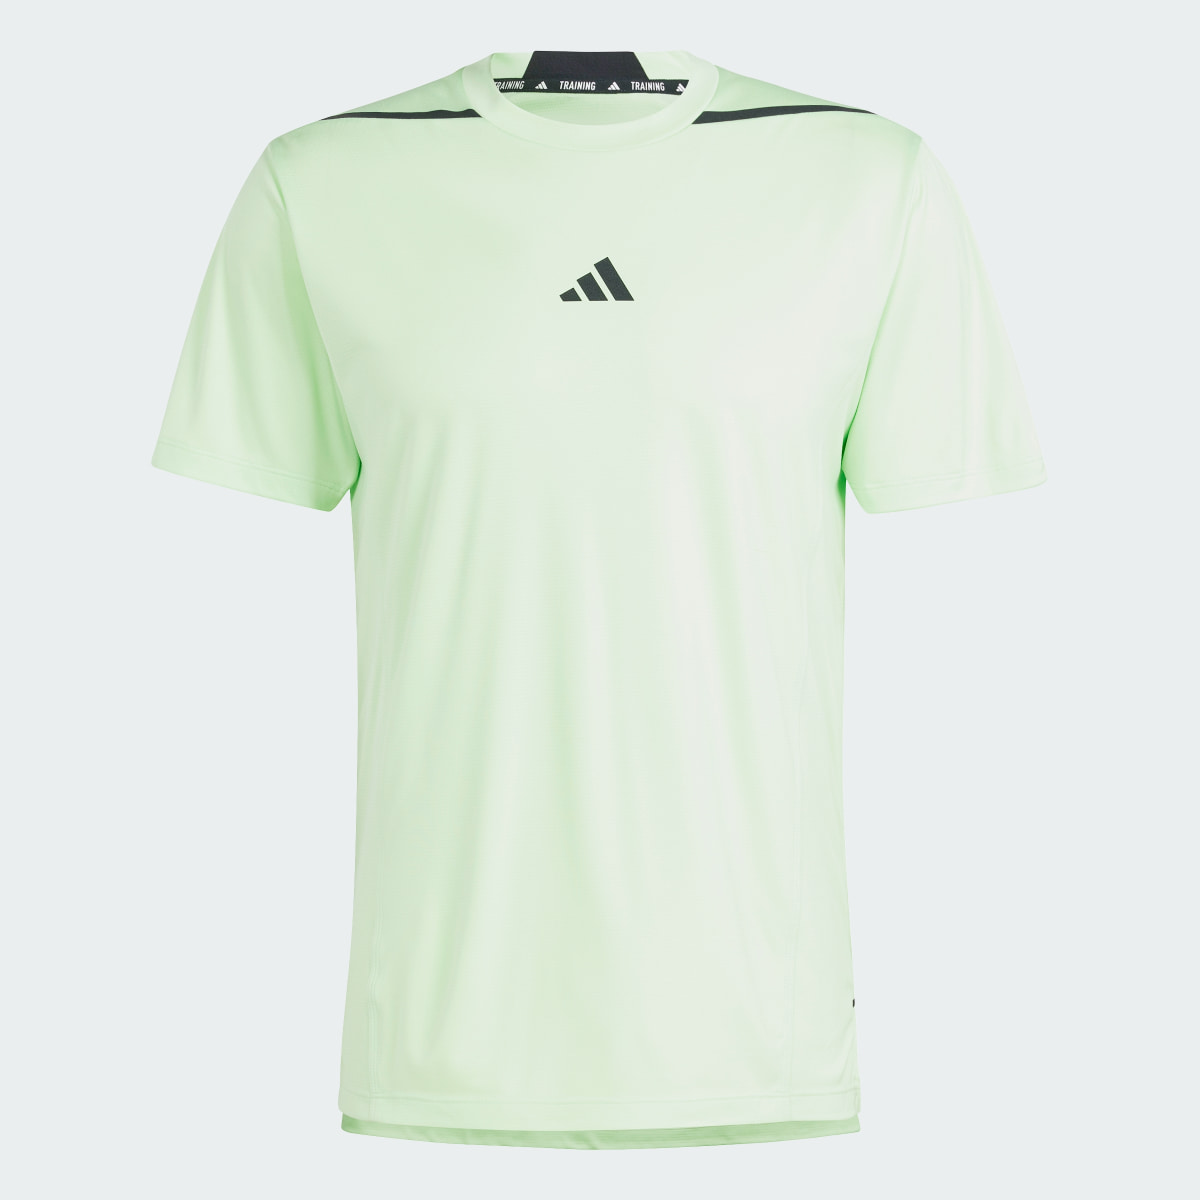 Adidas Designed for Training Adistrong Workout Tee. 5